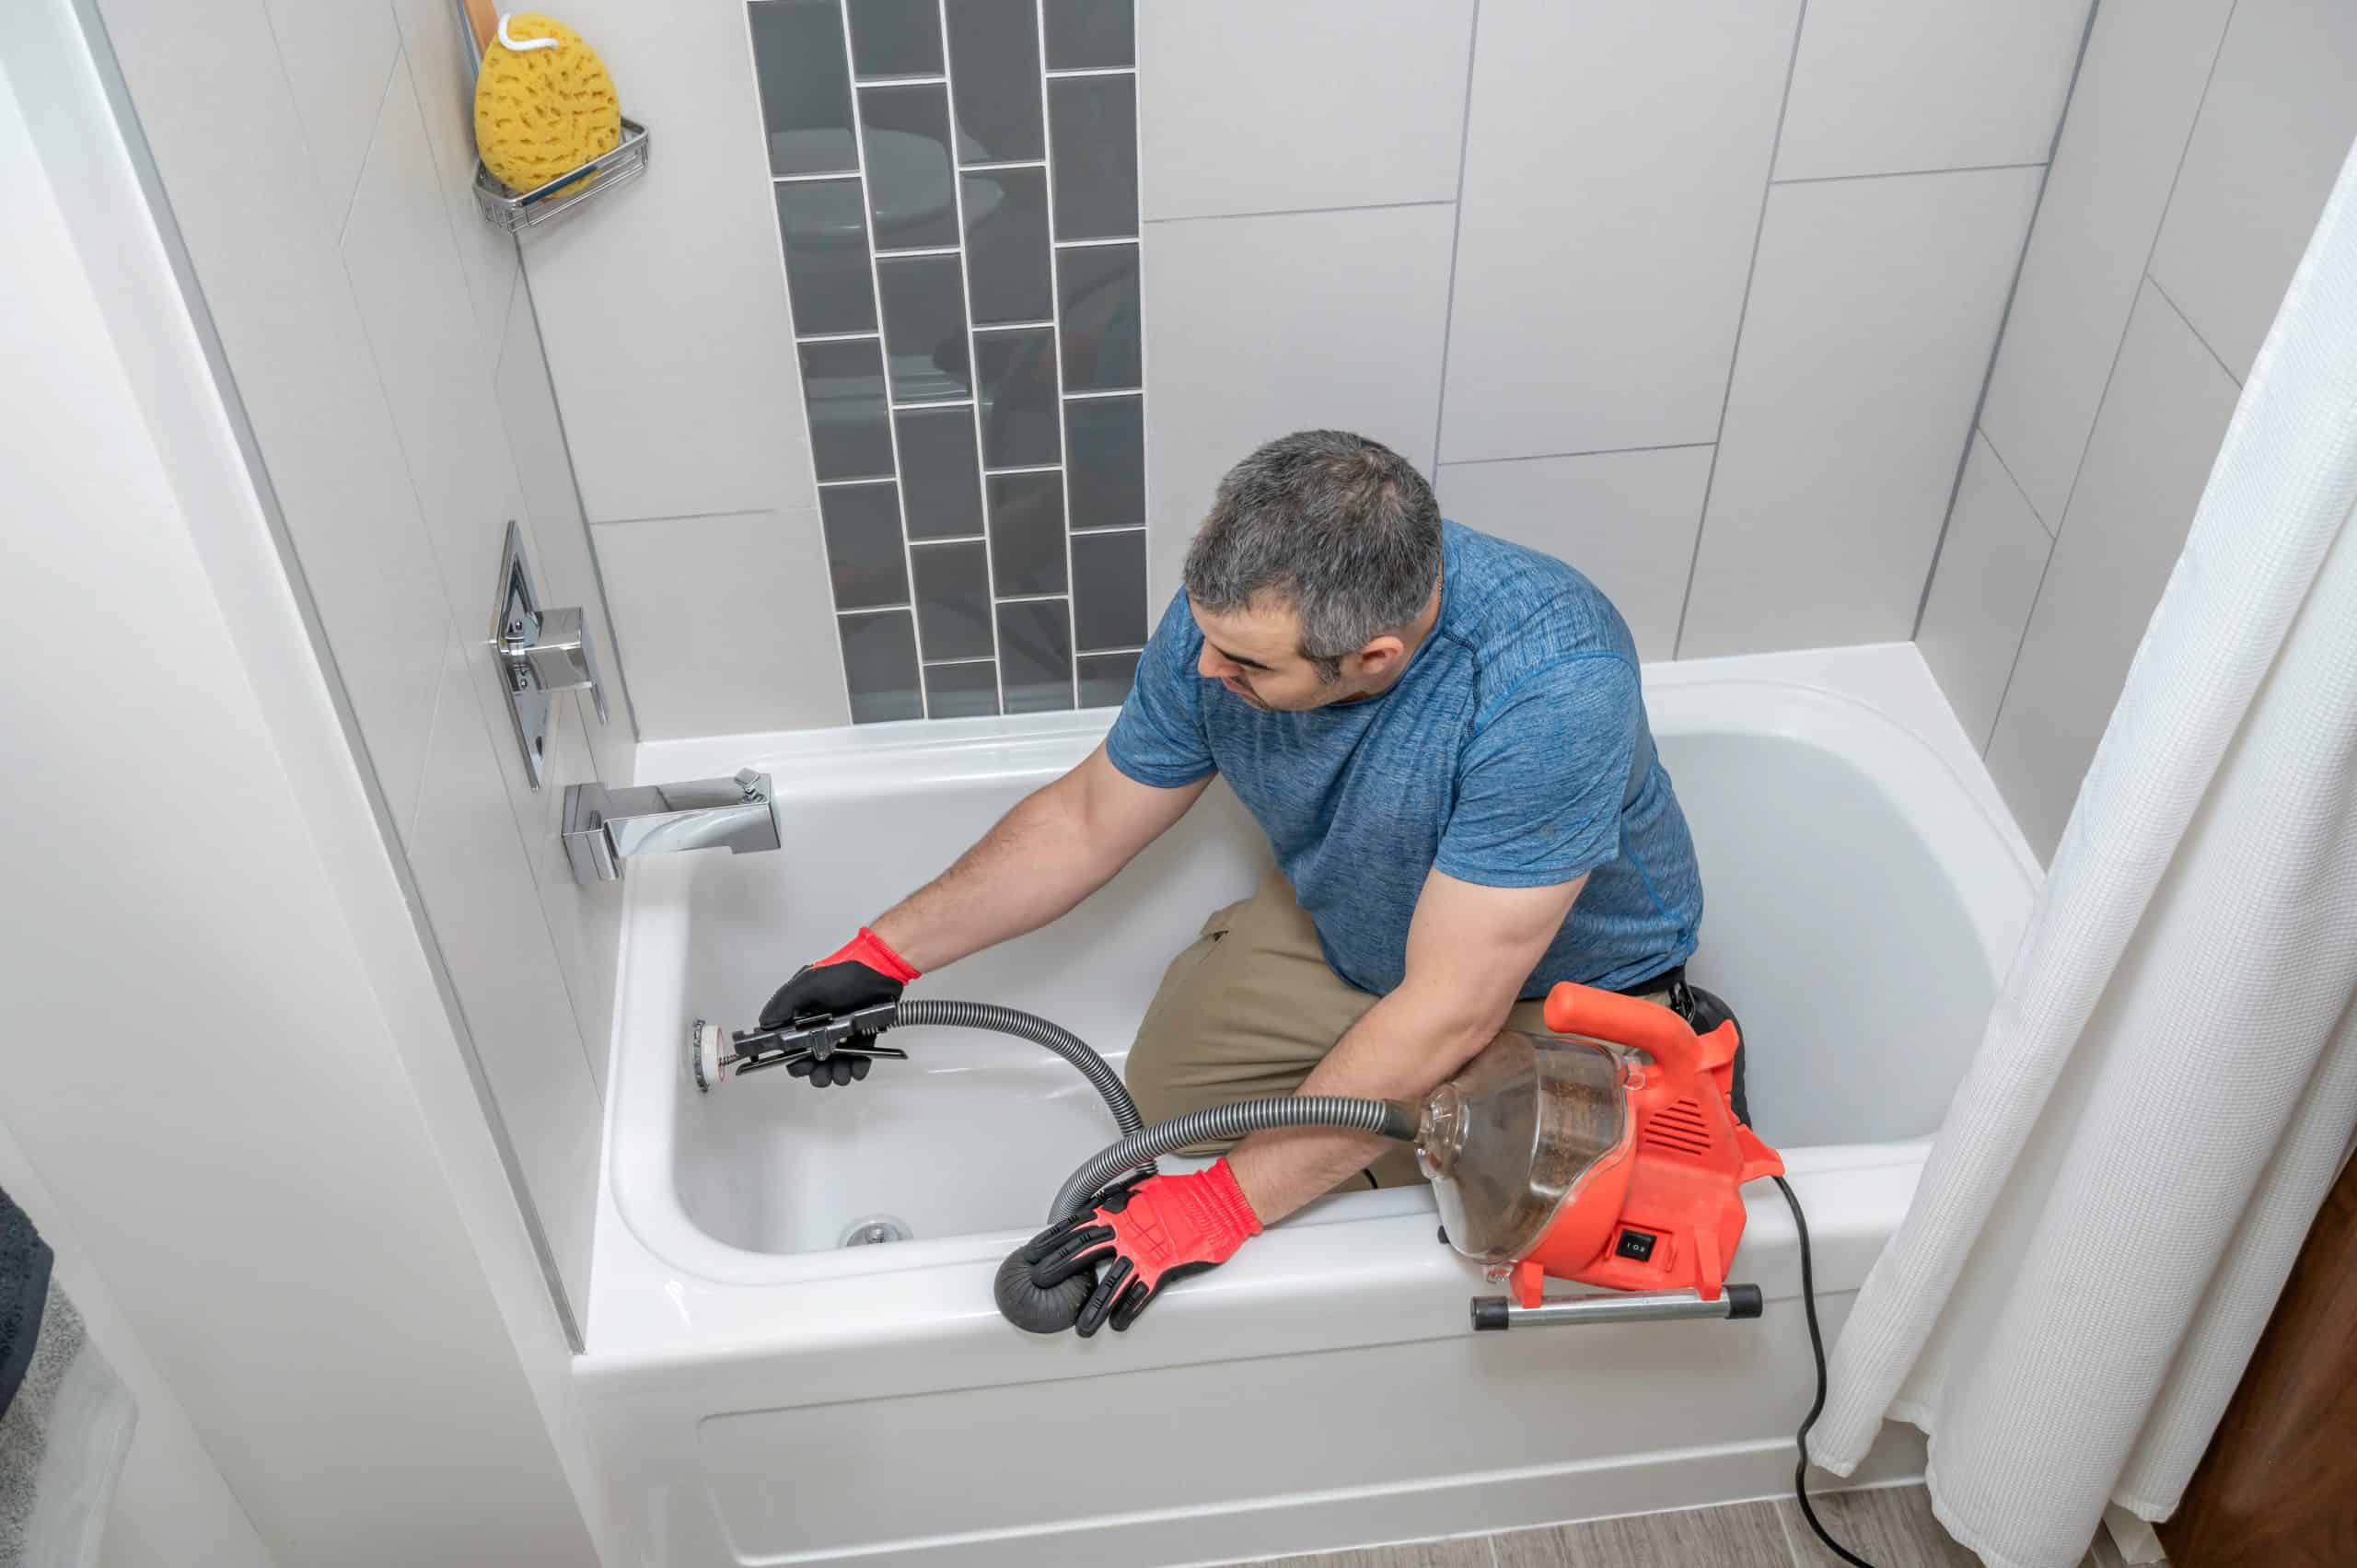 What Are The Signs That Your Vaughan Home Requires Drain Repair Or